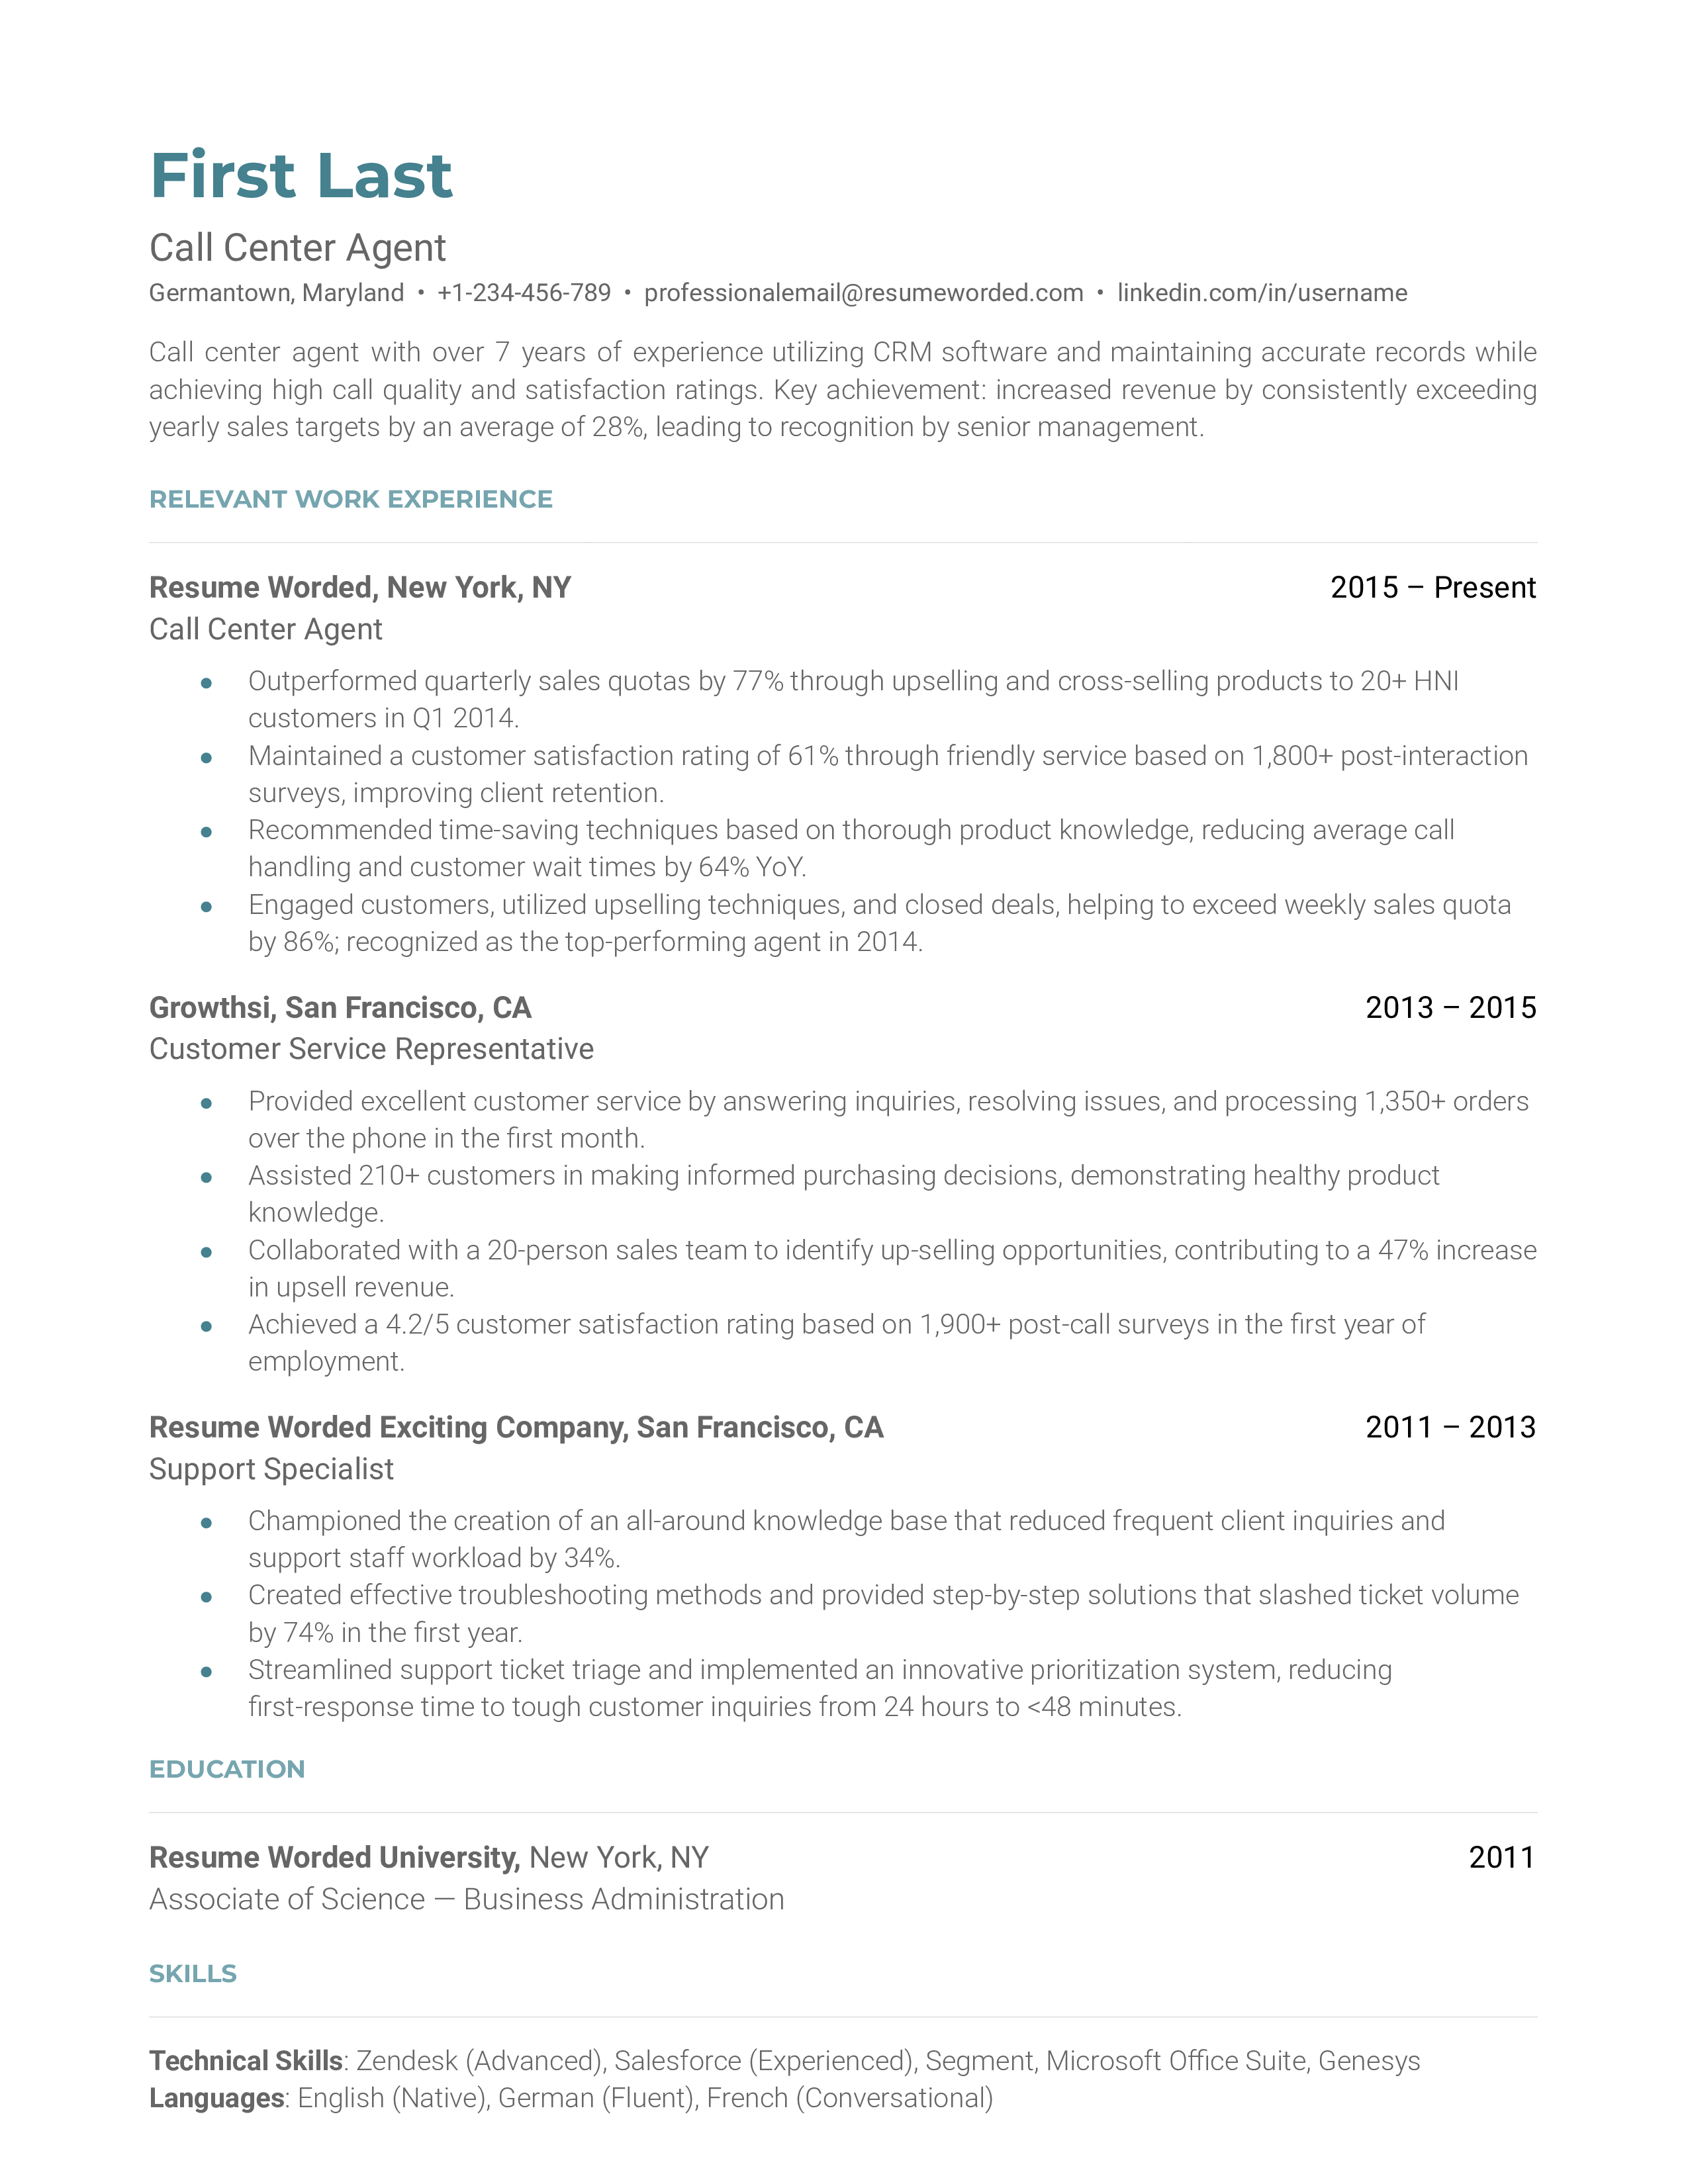 A resume screenshot for a call center agent role, showcasing proficiency in digital tools and versatility in customer interactions.